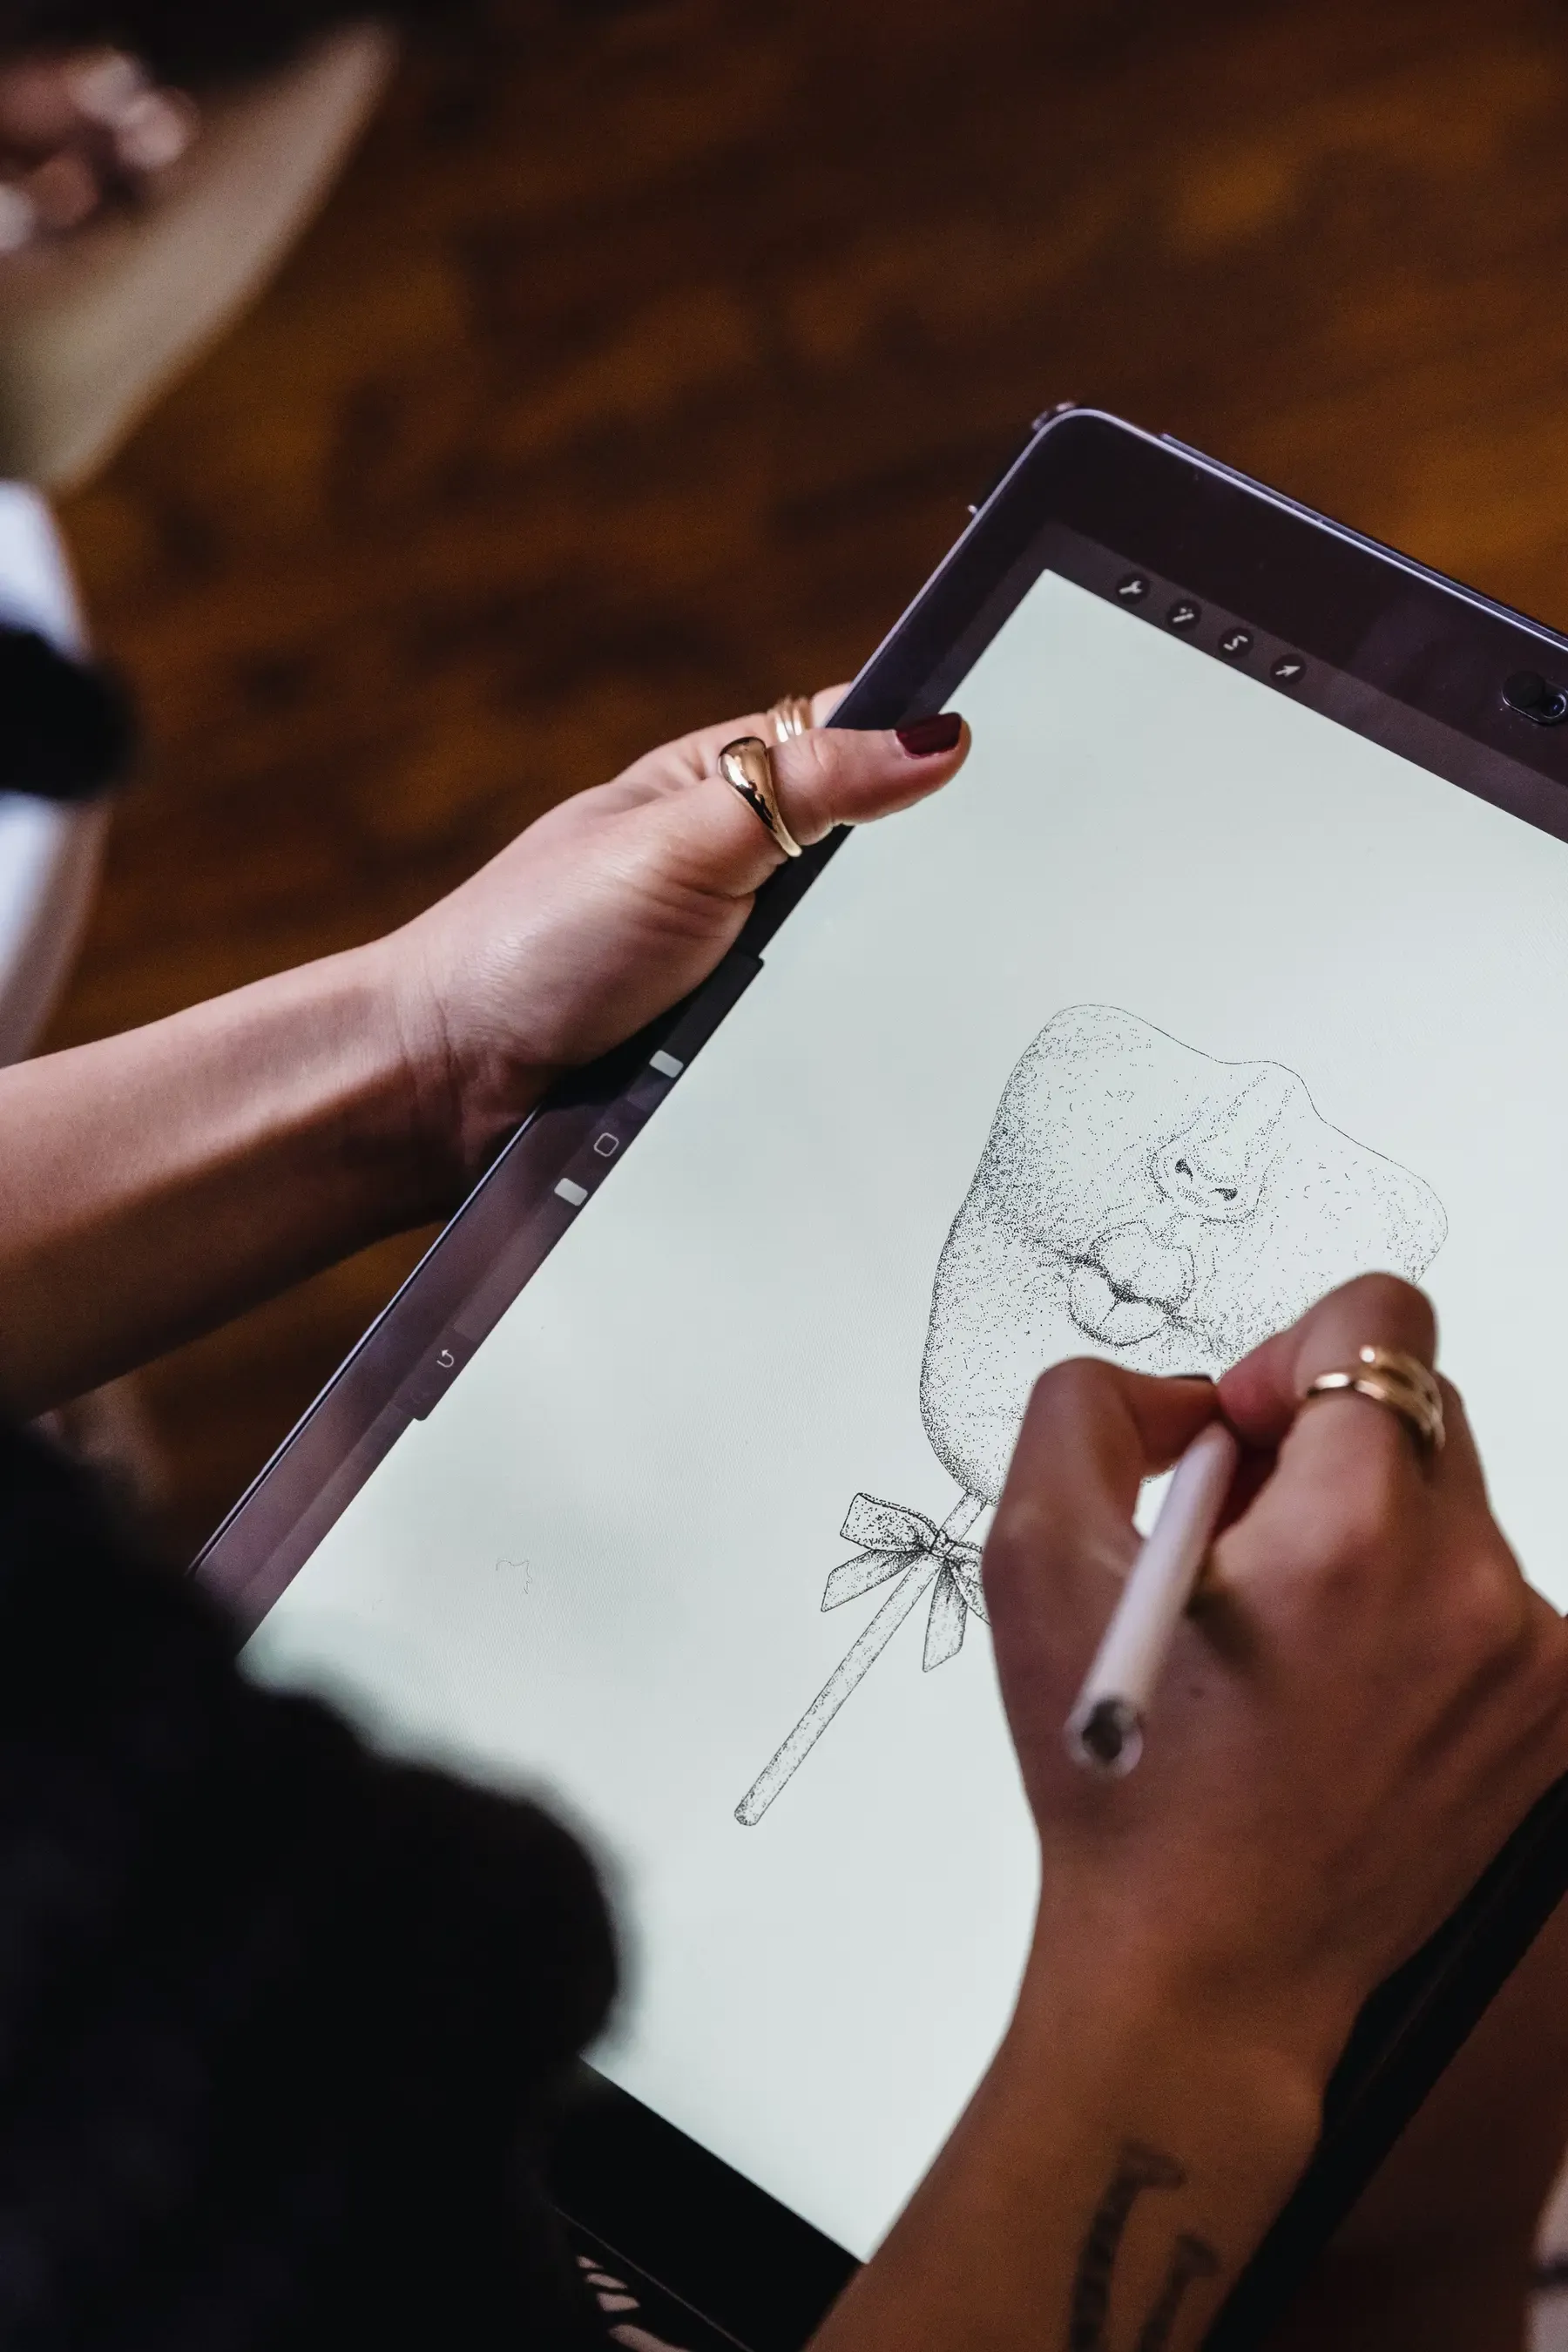 The secret weapon of successful creatives: Best Laptop for Artist